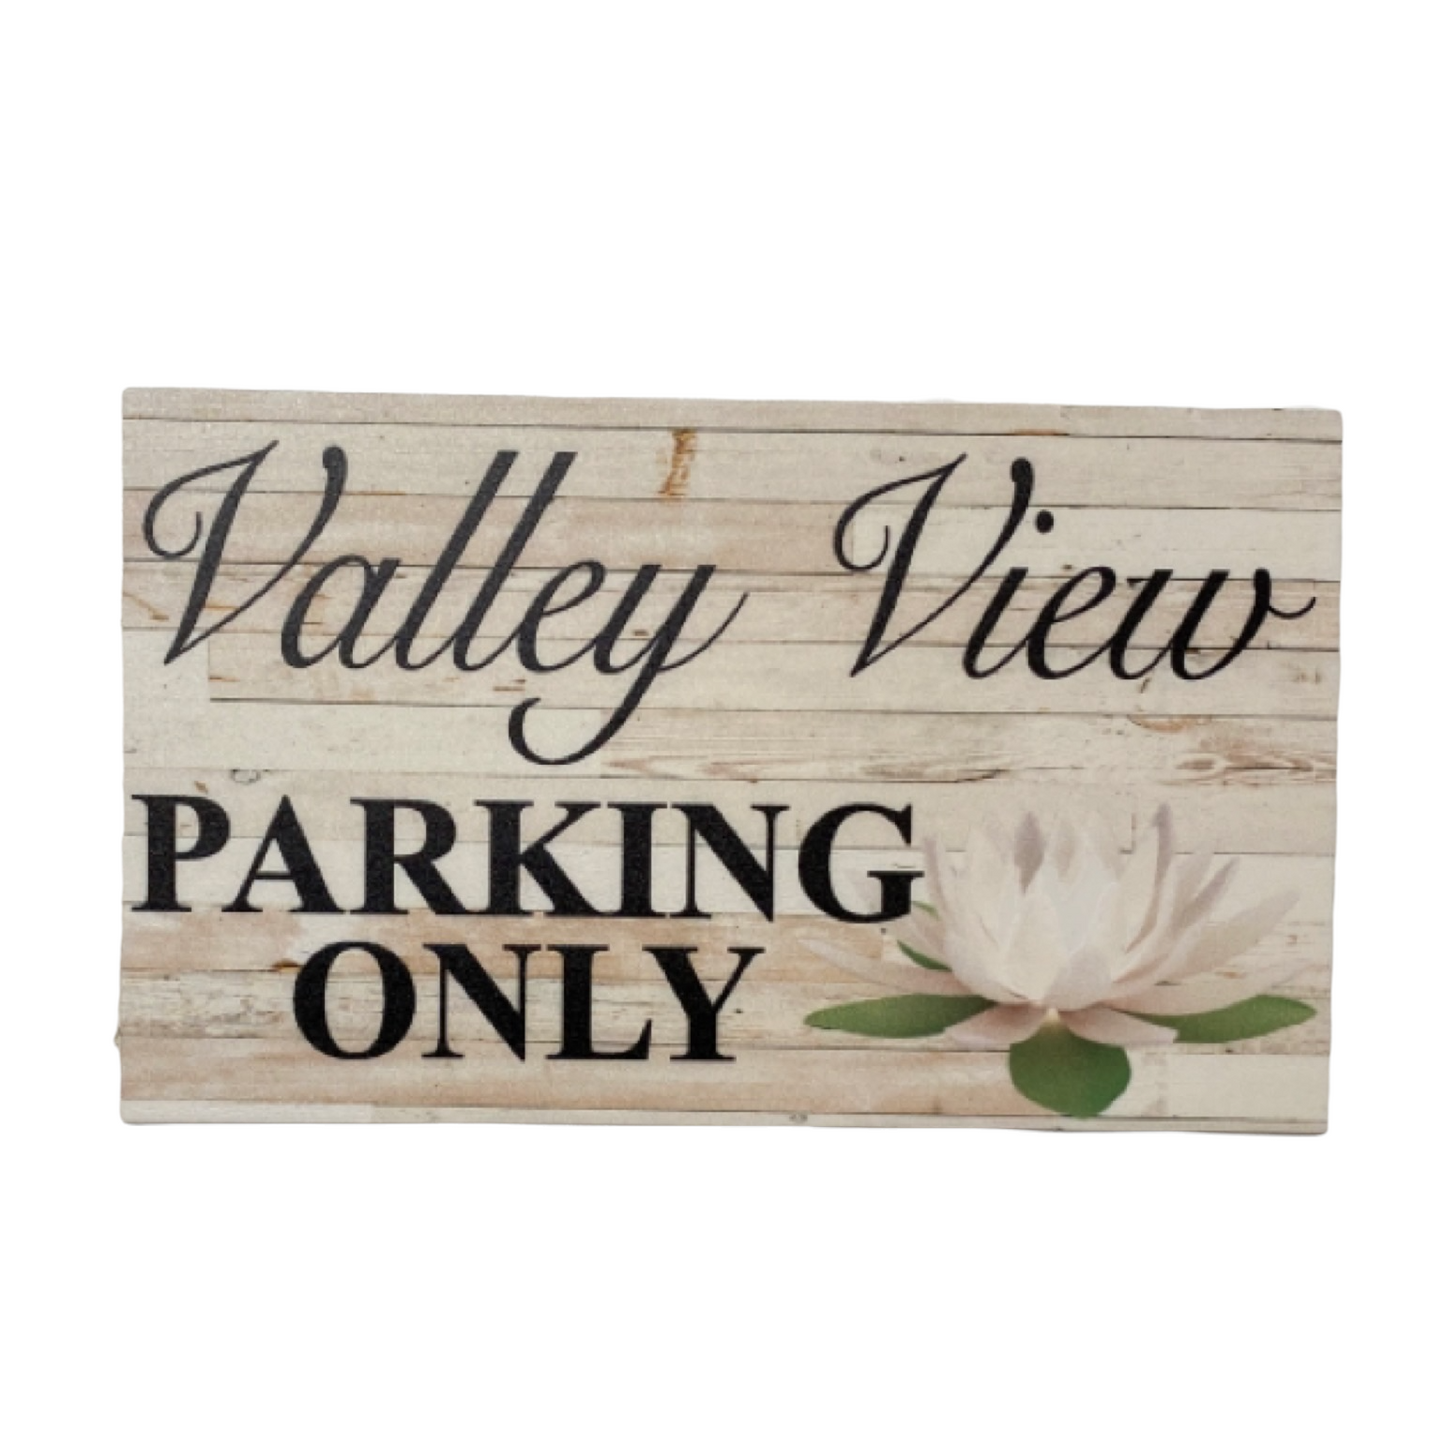 Parking Only Custom Wording Text Lotus Sign - The Renmy Store Homewares & Gifts 